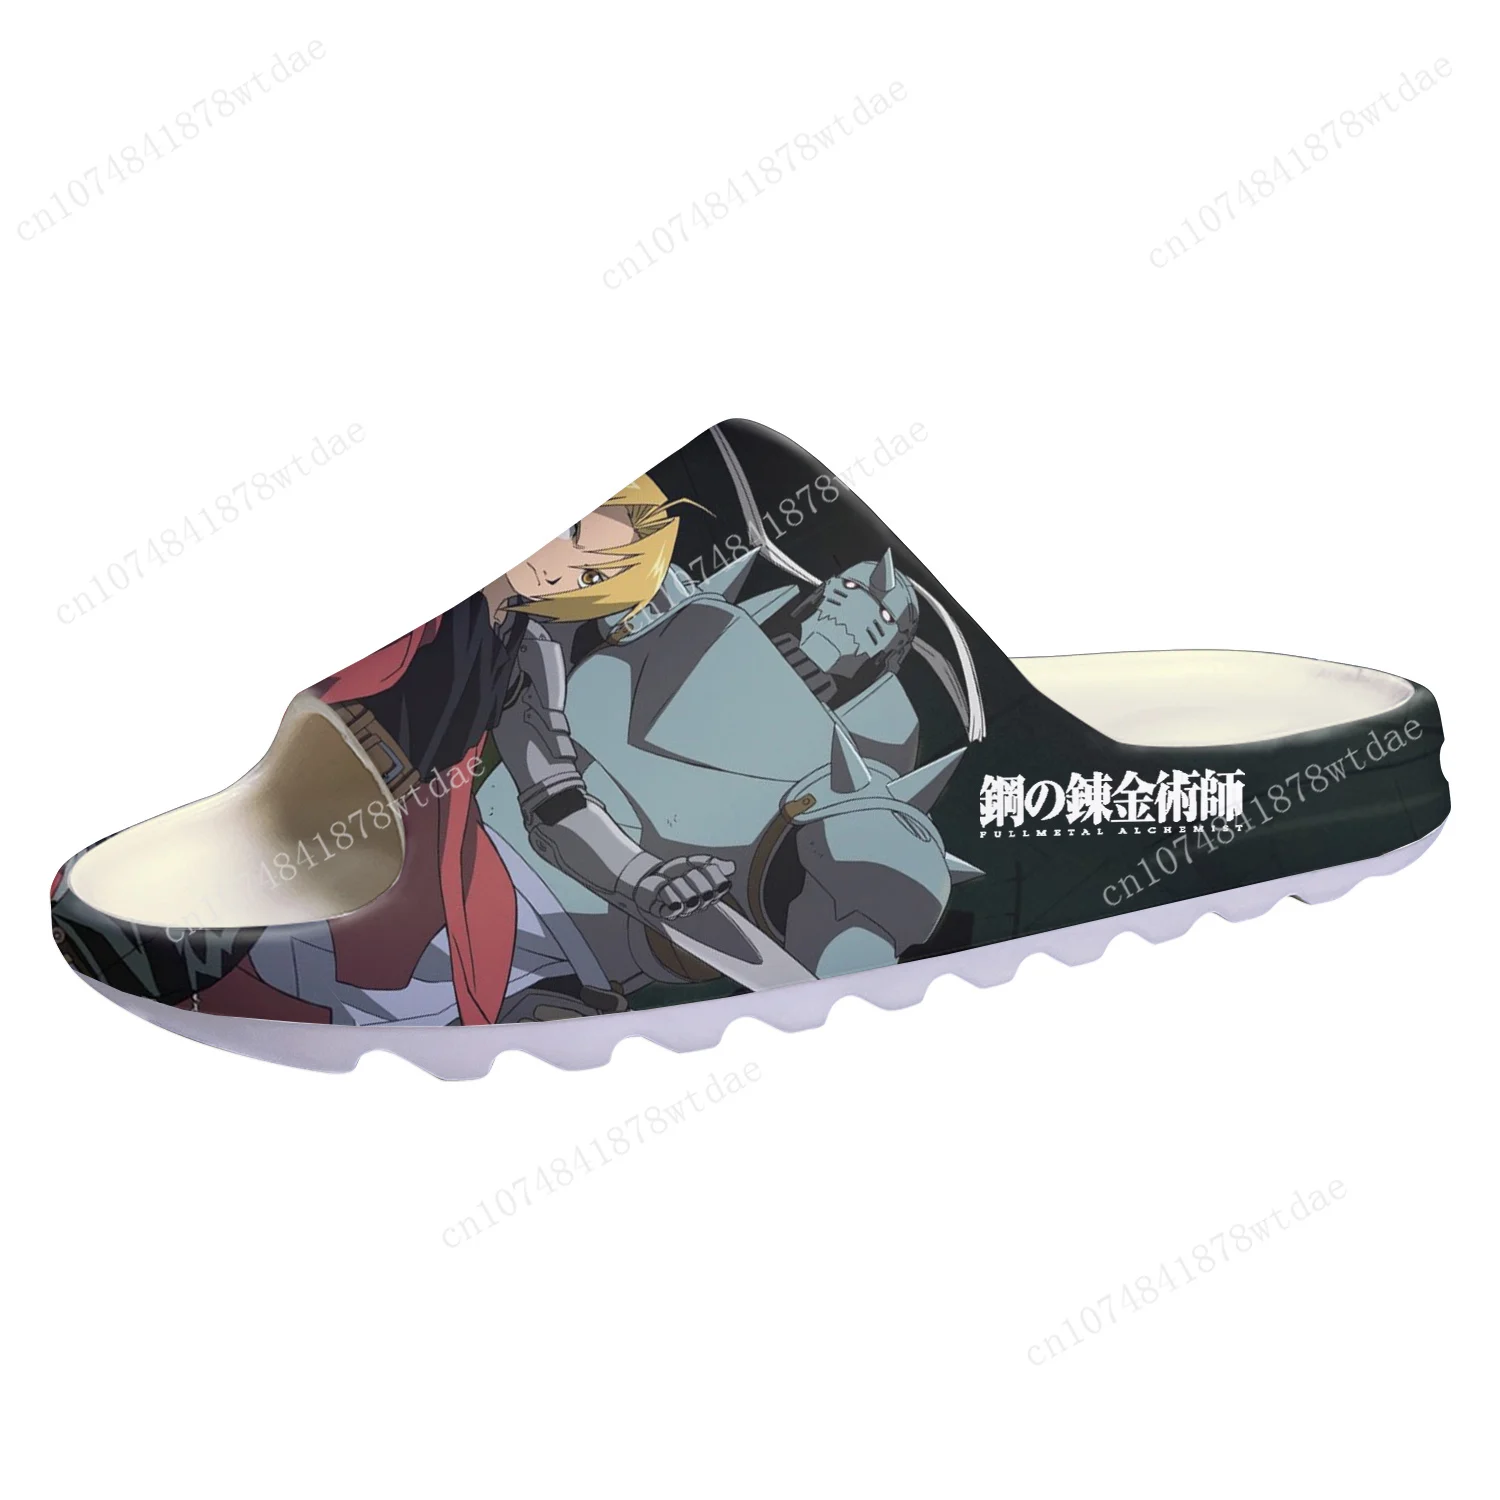 

Fullmetal Alchemist Soft Sole Sllipers Men Women Teenager Home Clogs Edward Elric Step In Water Shoes On Shit Custodmize Sanals